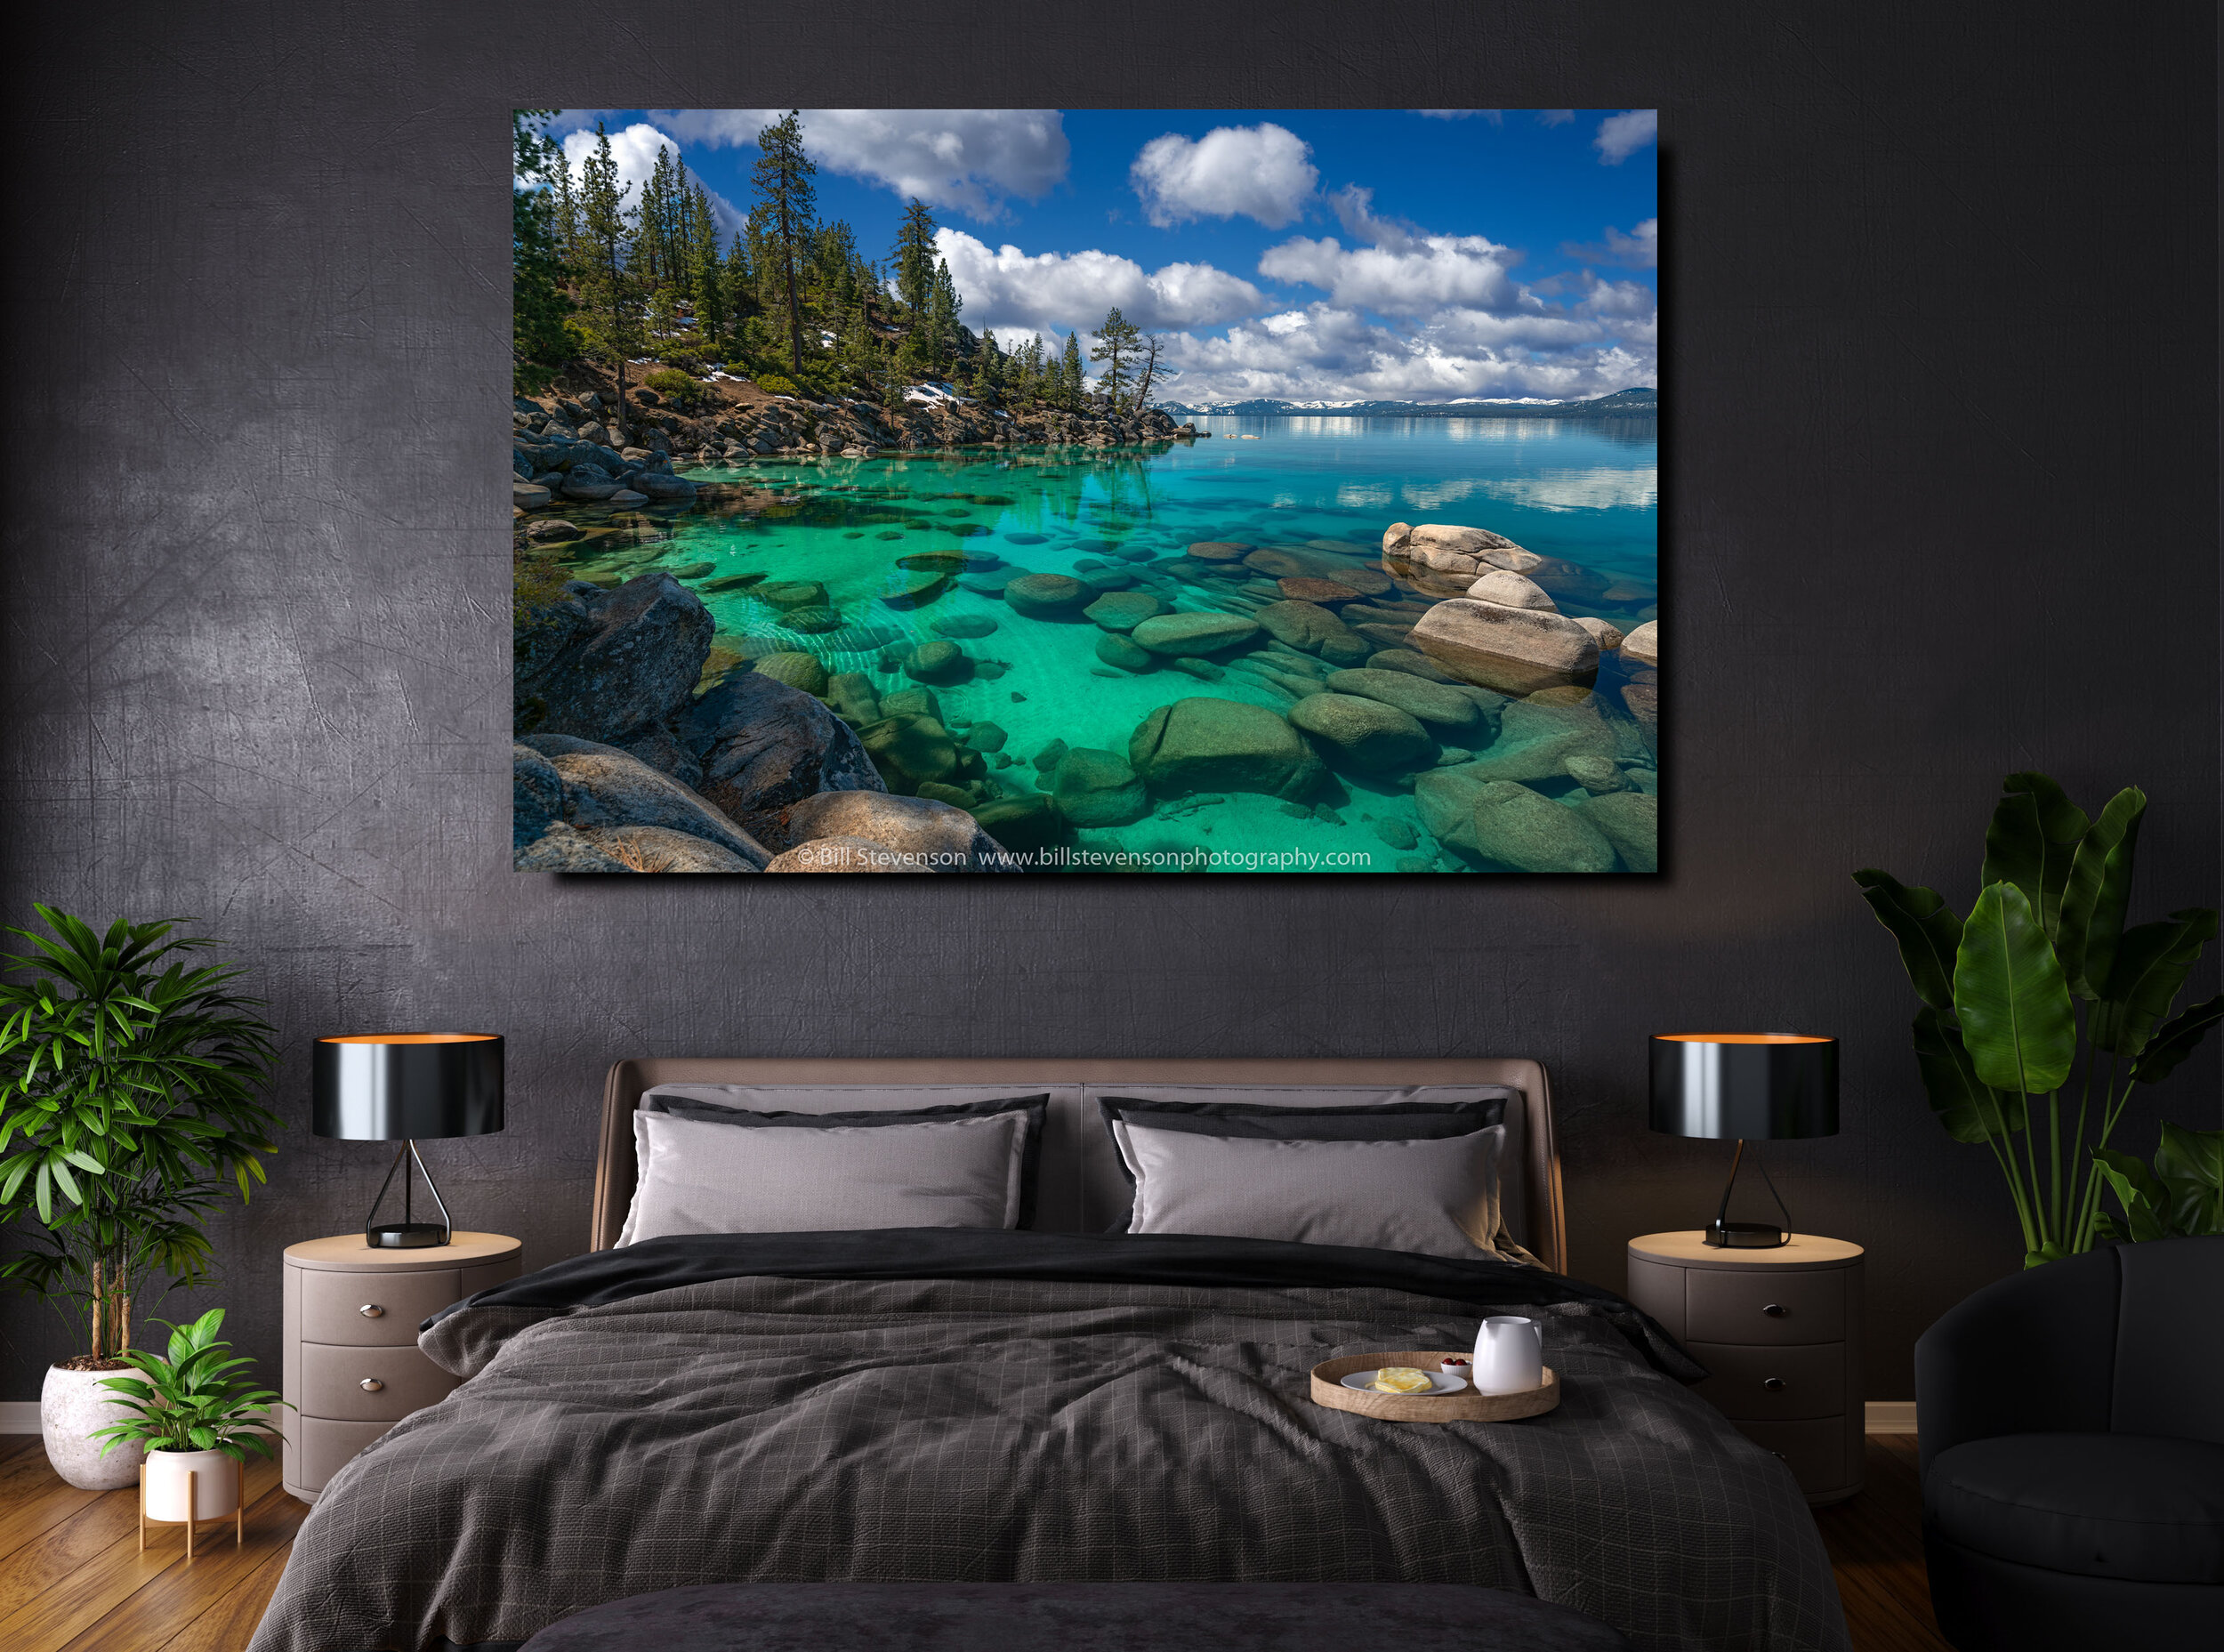 Lake Tahoe picture in a bedroom.